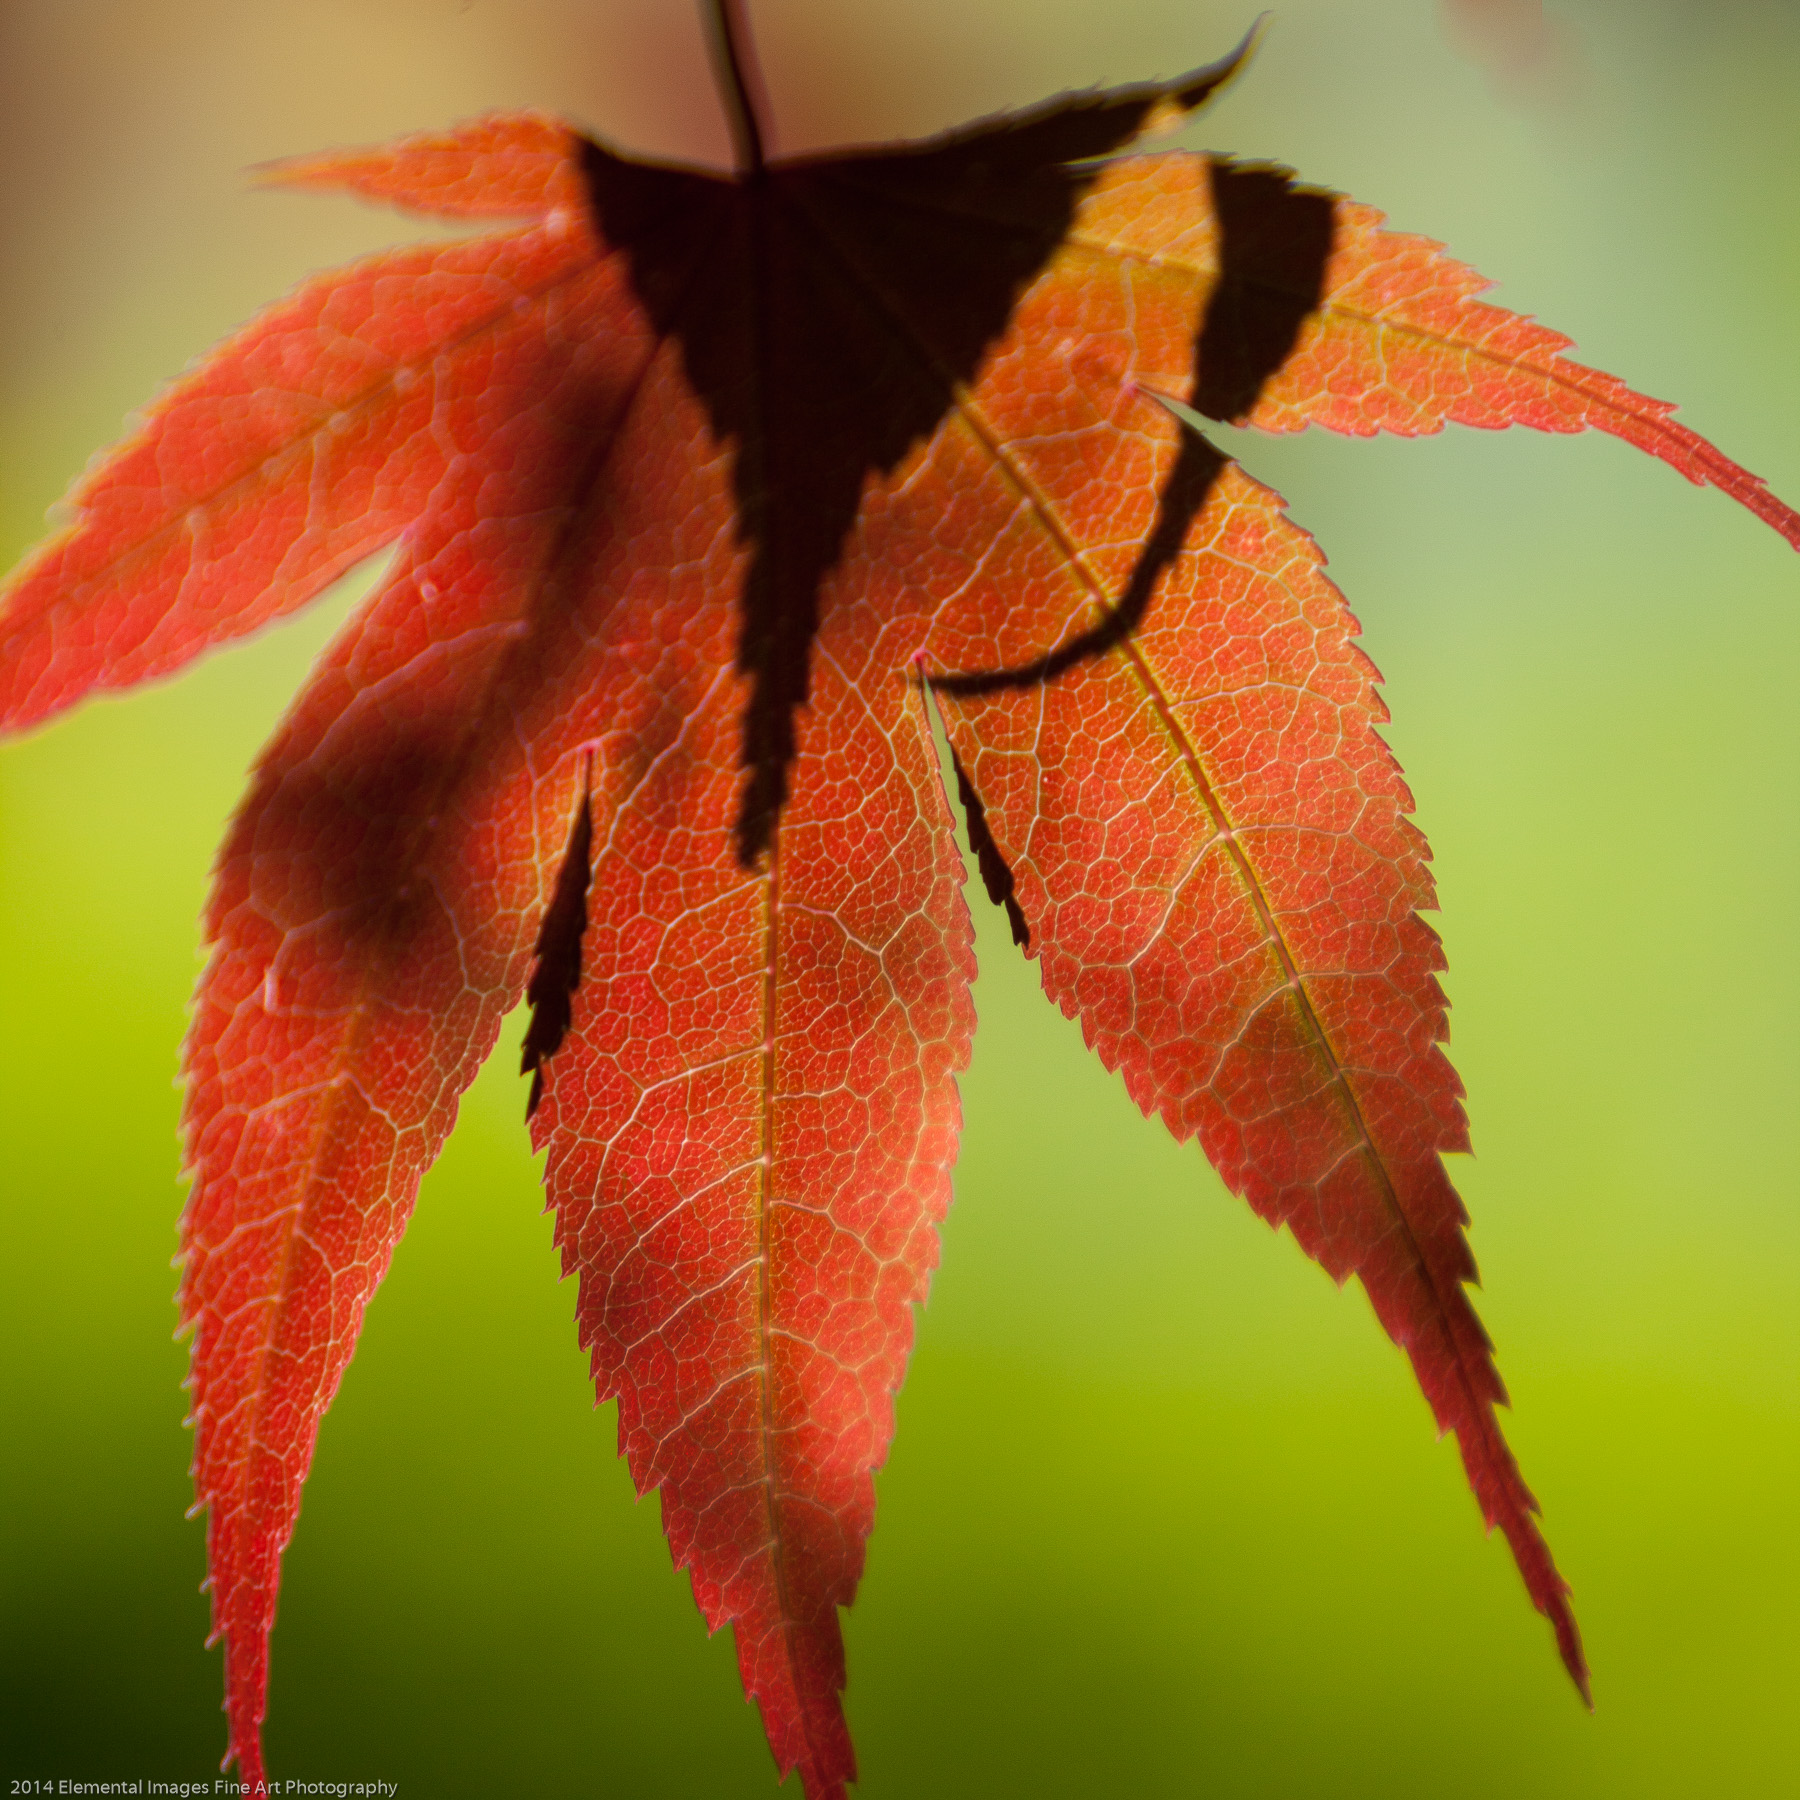 Leaves LXC | Portland | OR | USA - © 2014 Elemental Images Fine Art Photography - All Rights Reserved Worldwide